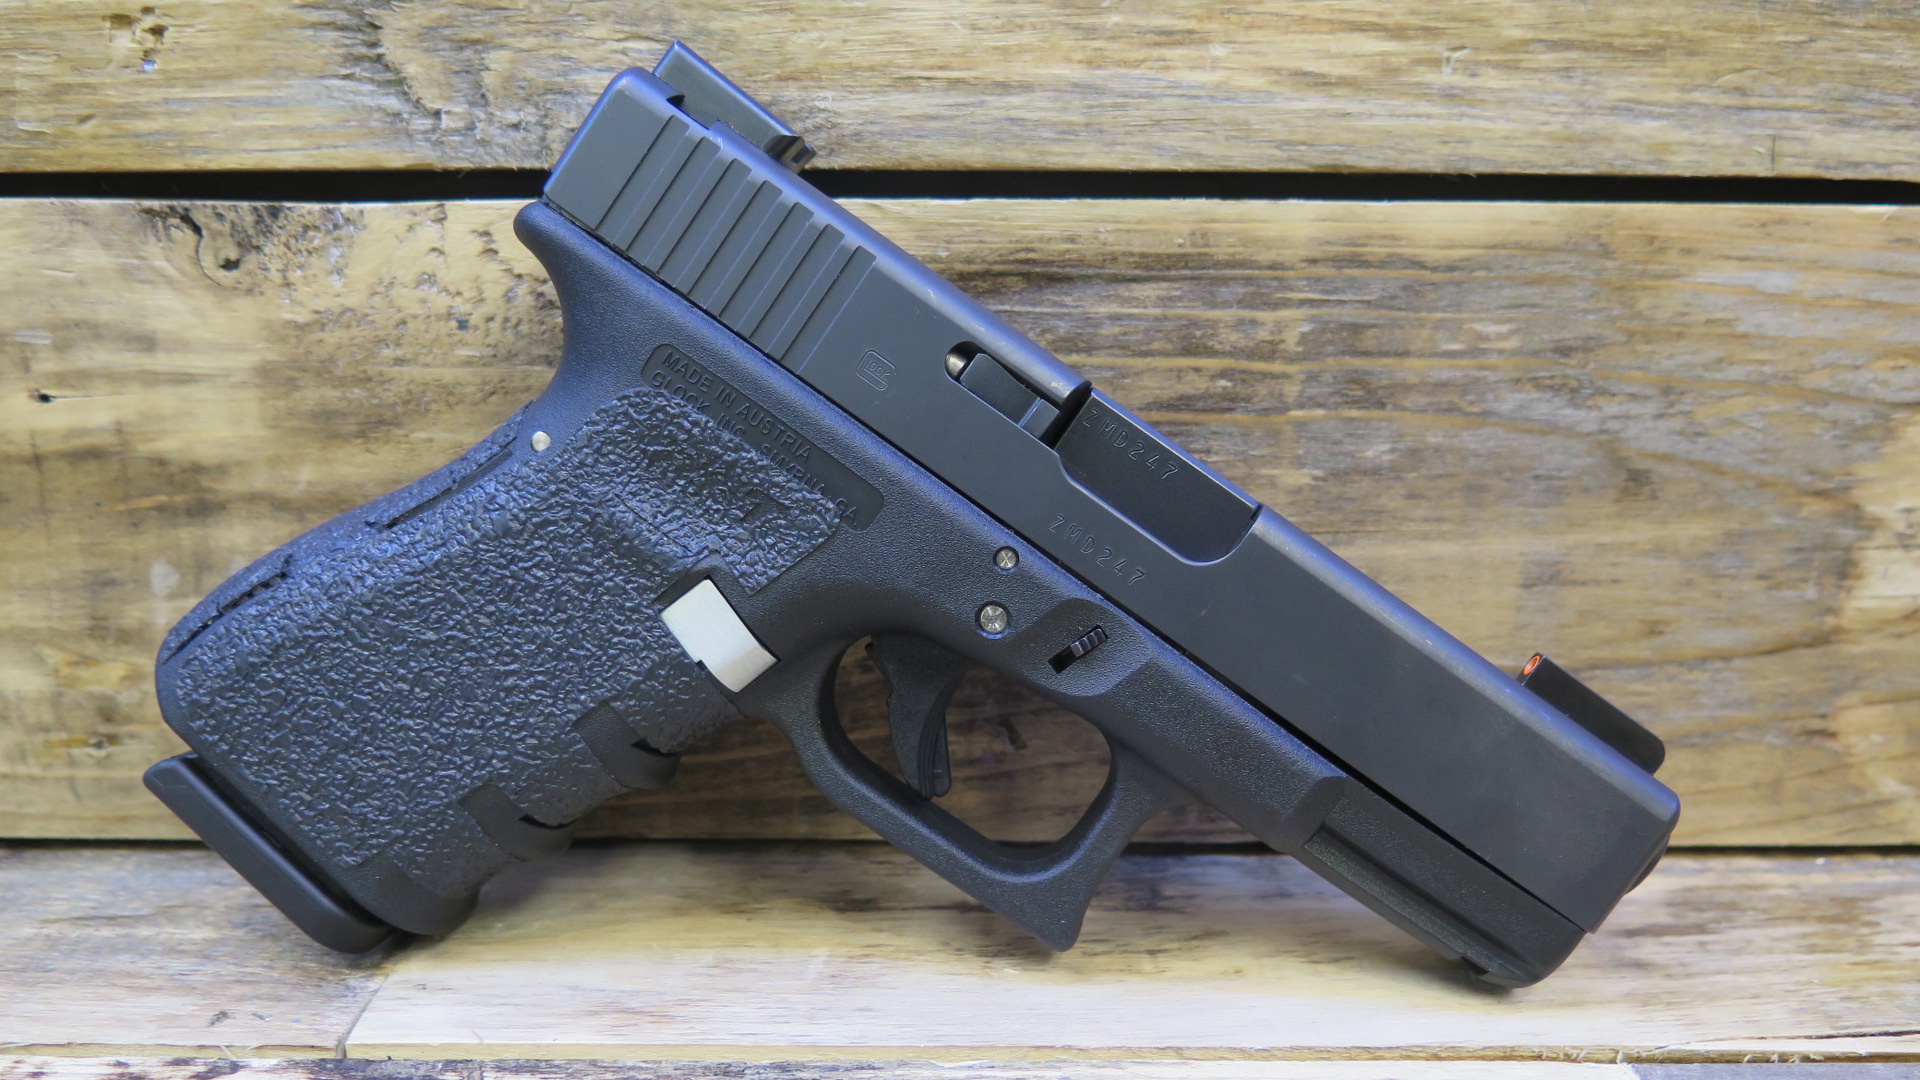 glock 40 compact with extended clip